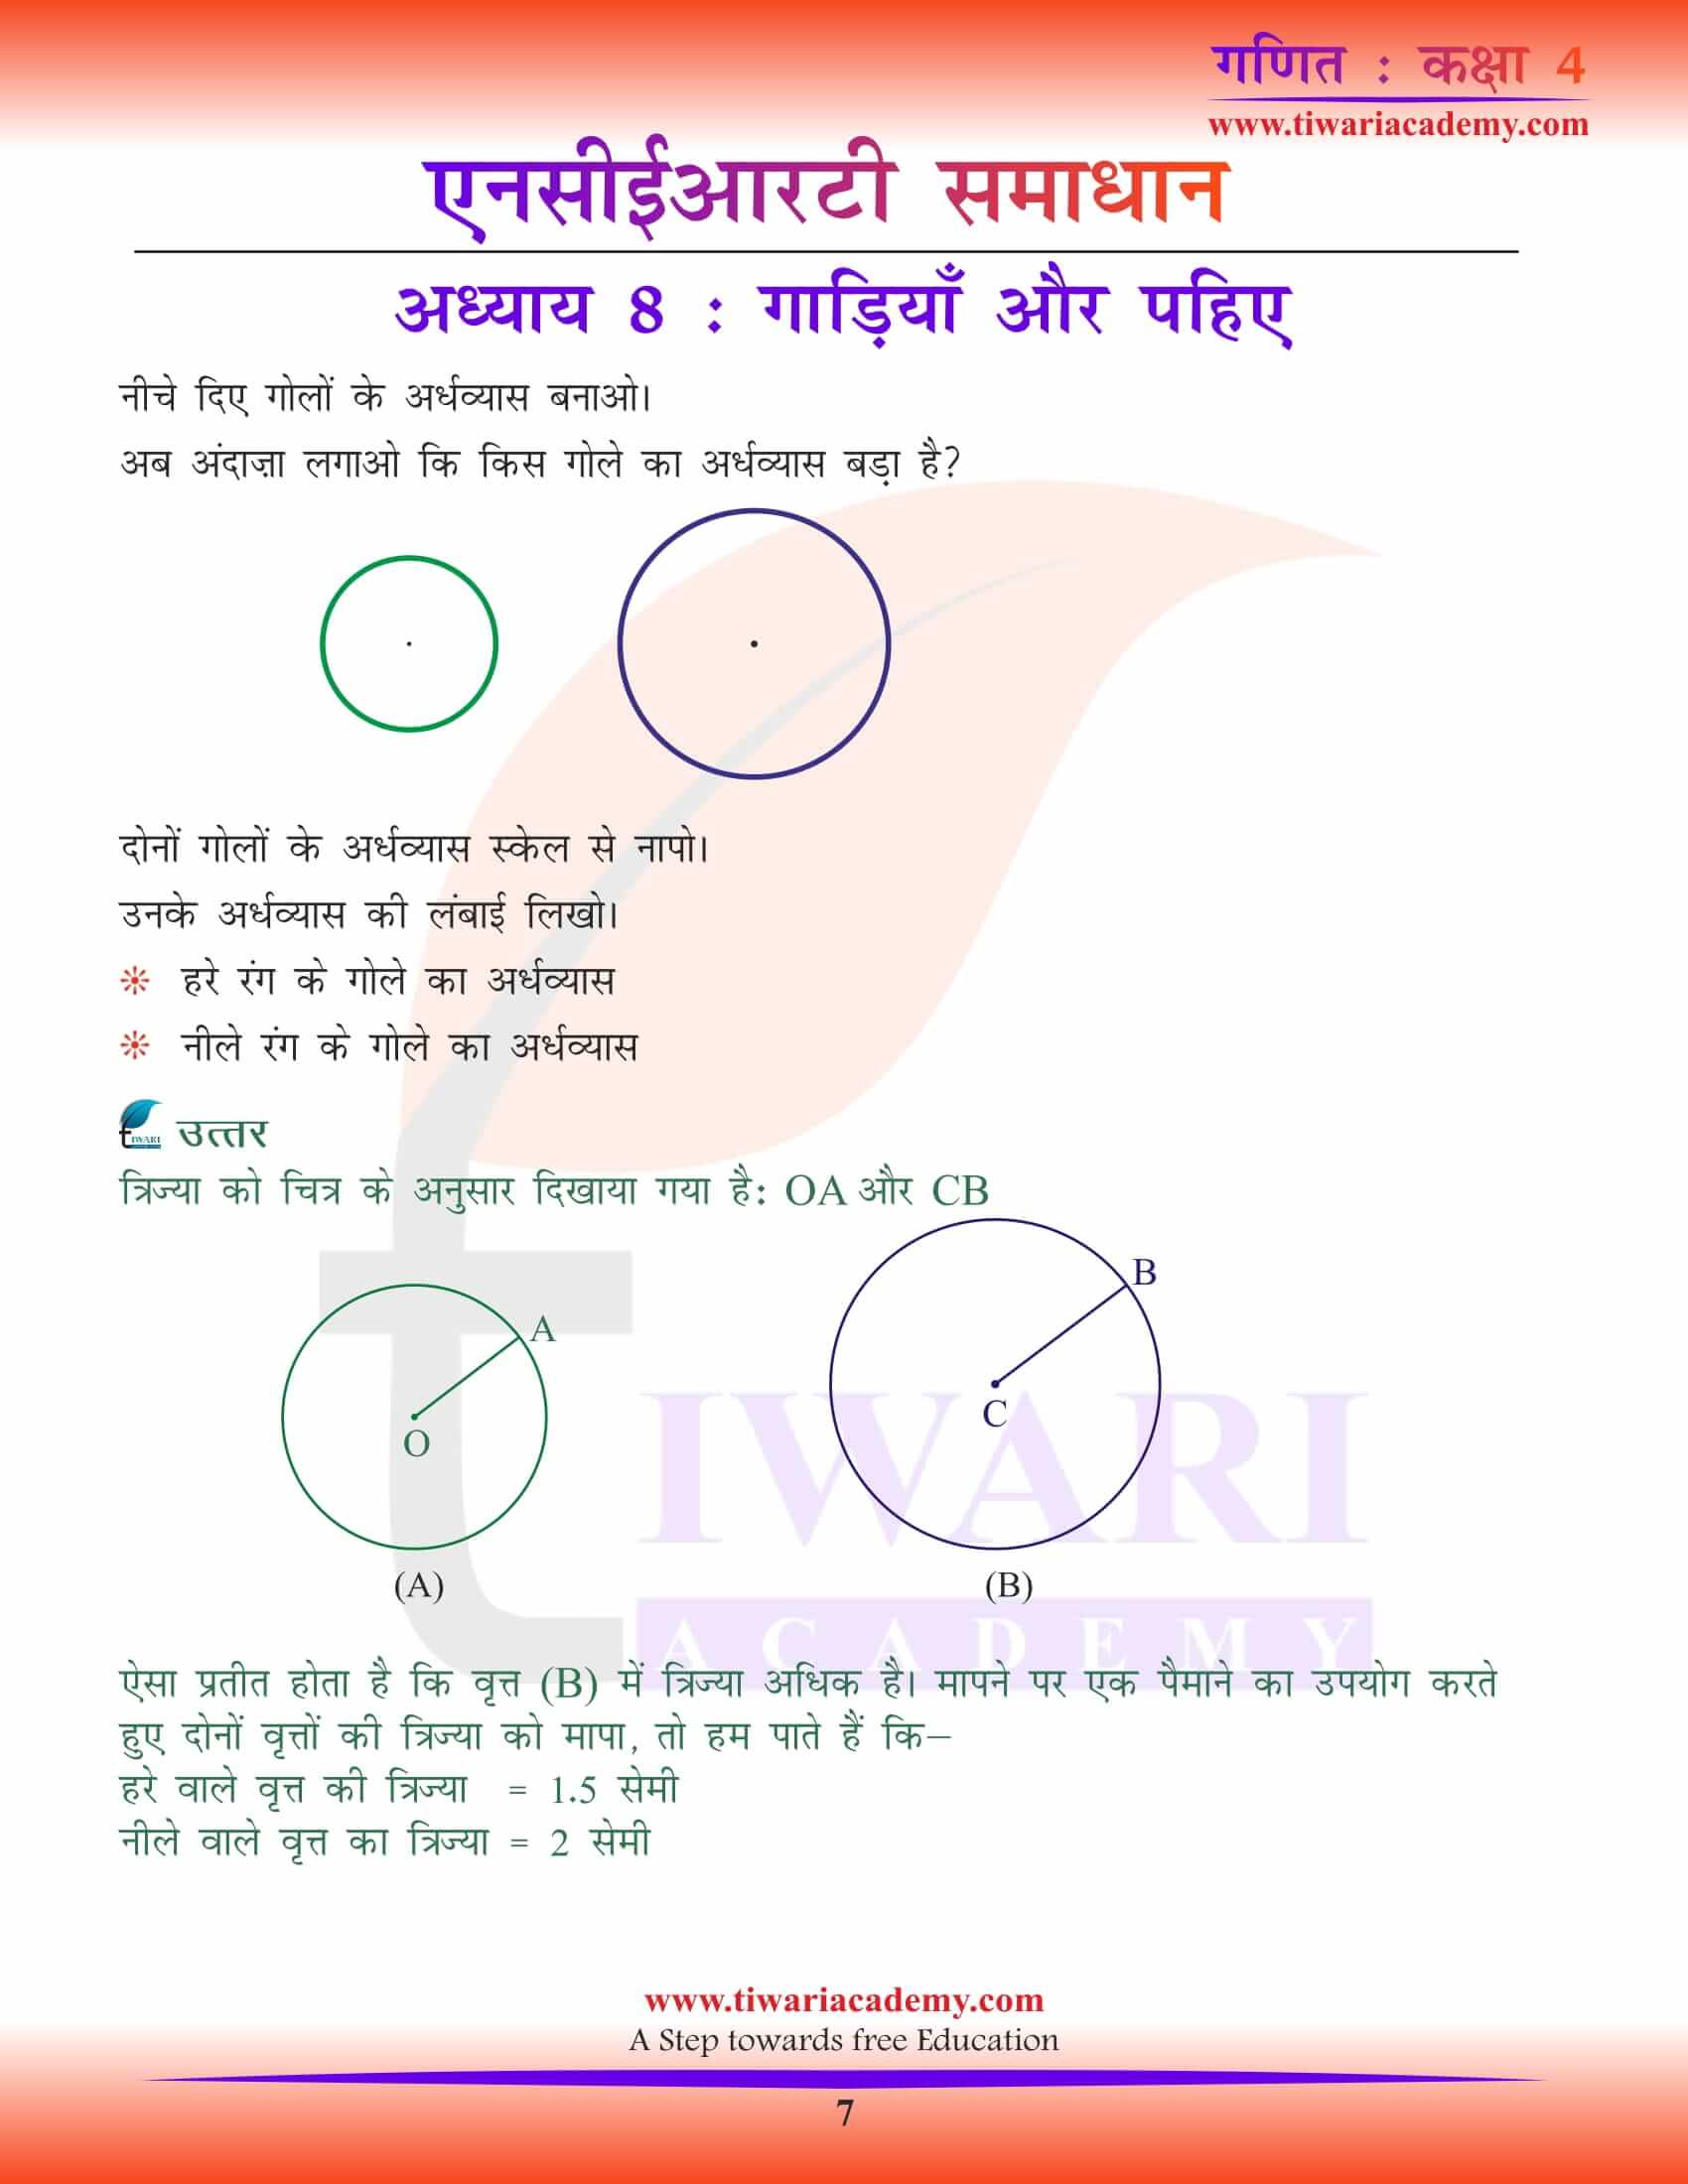 NCERT Solutions for Class 4 Maths Chapter 8 Hindi Version